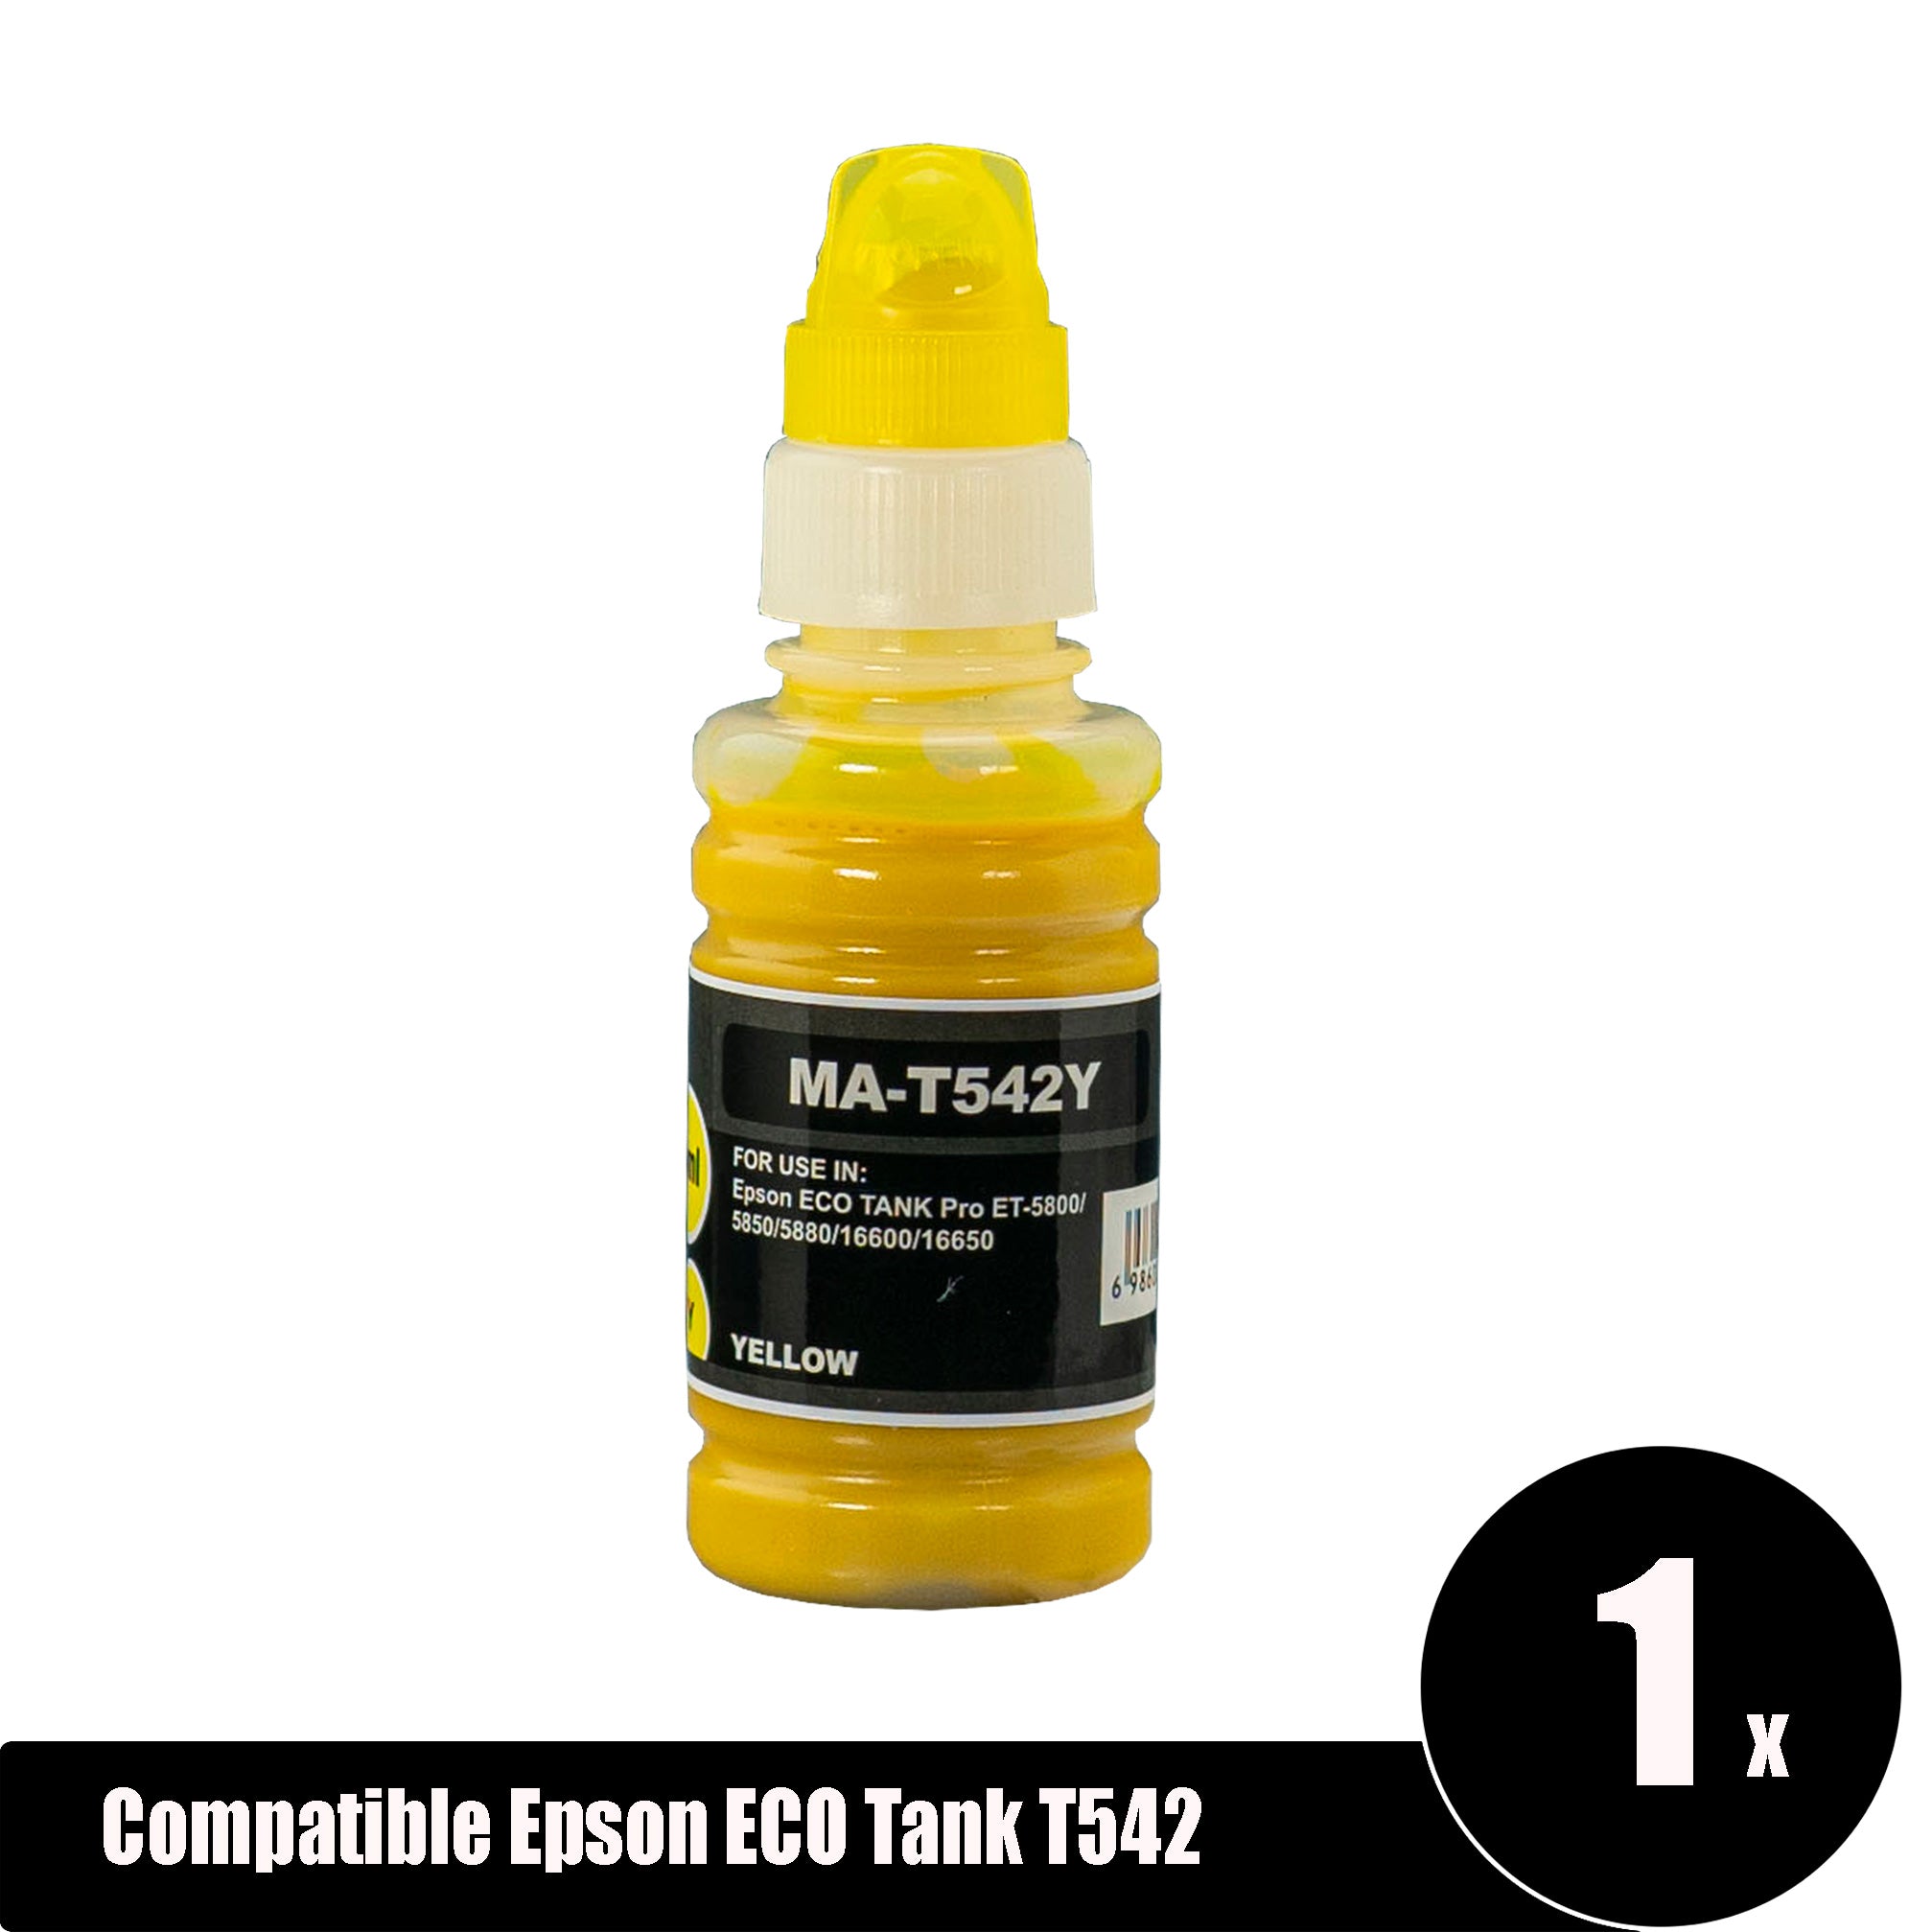 Compatible Epson ECO Tank T542 Yellow Ink